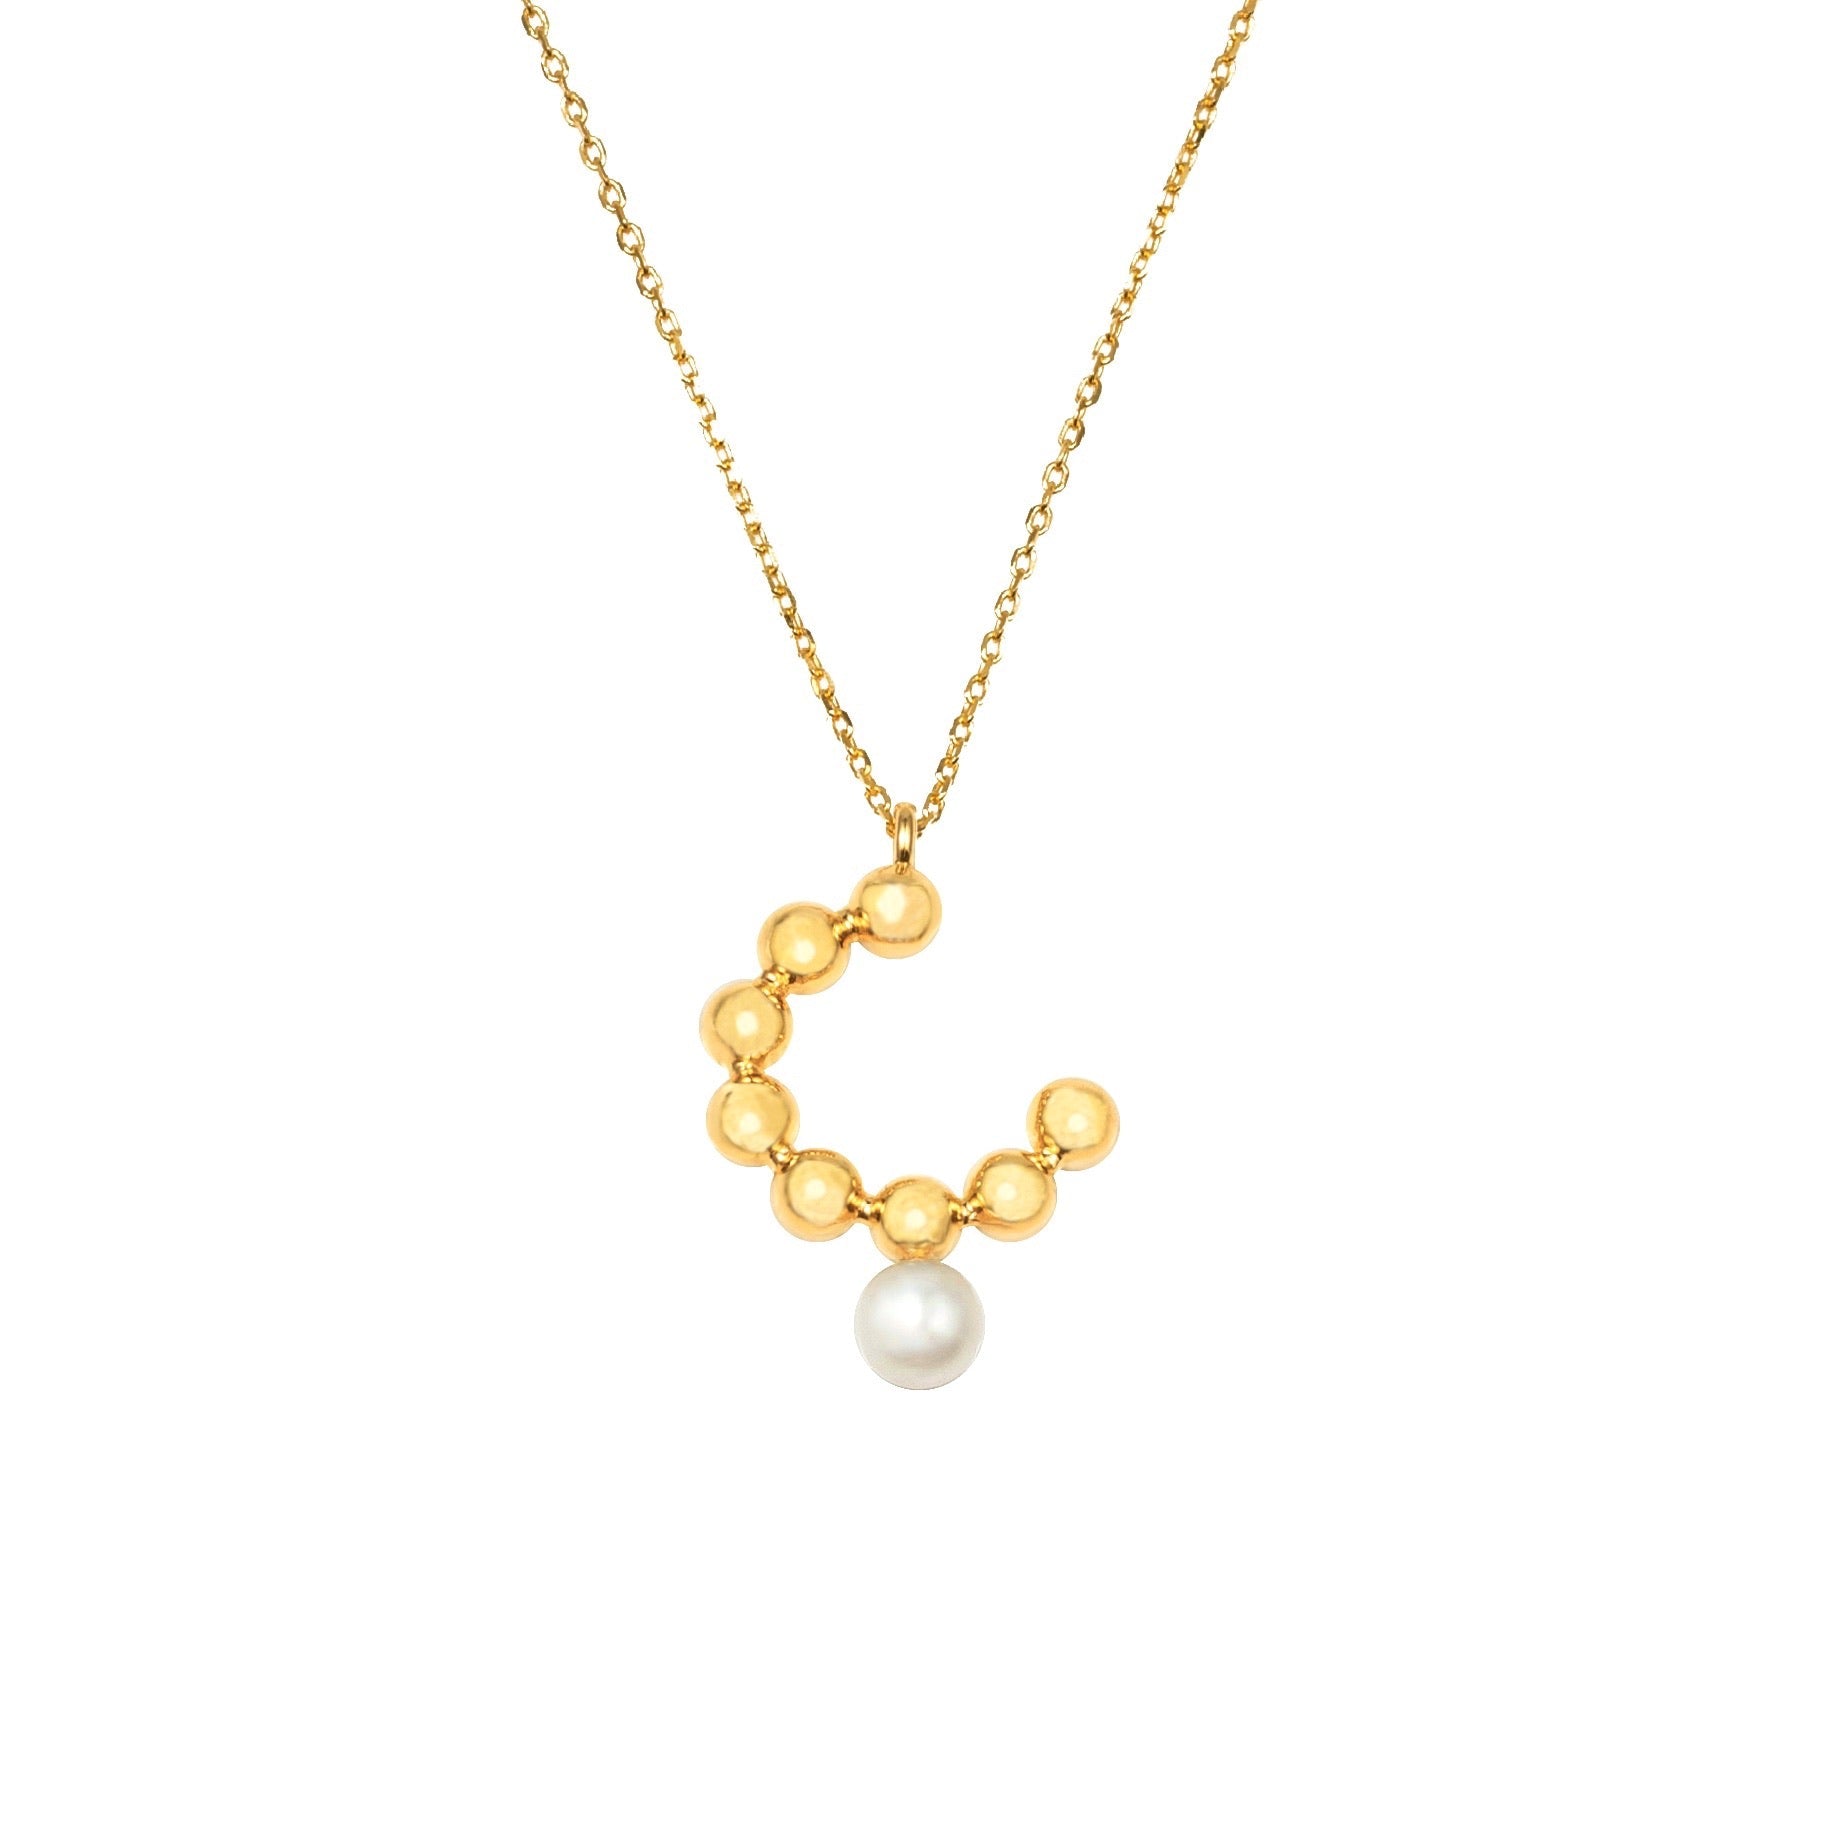 Cherry Necklace - Solid Gold